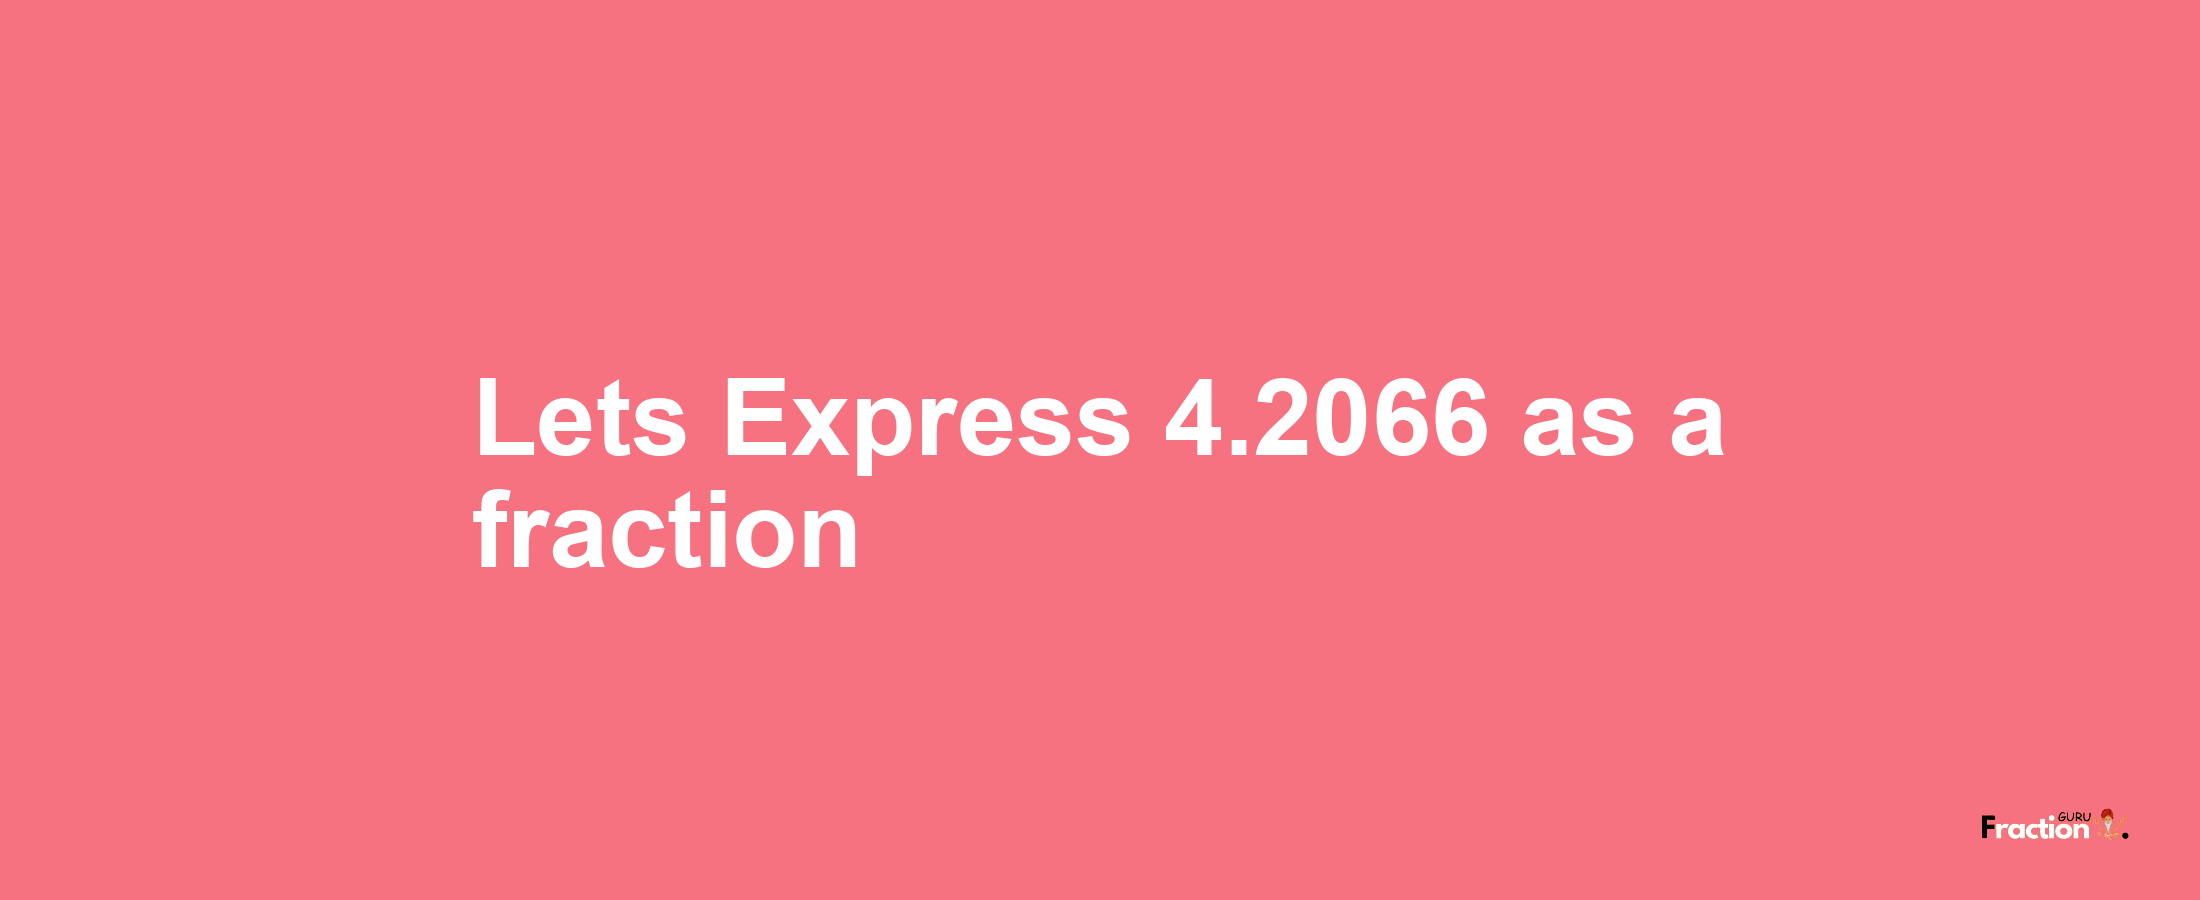 Lets Express 4.2066 as afraction